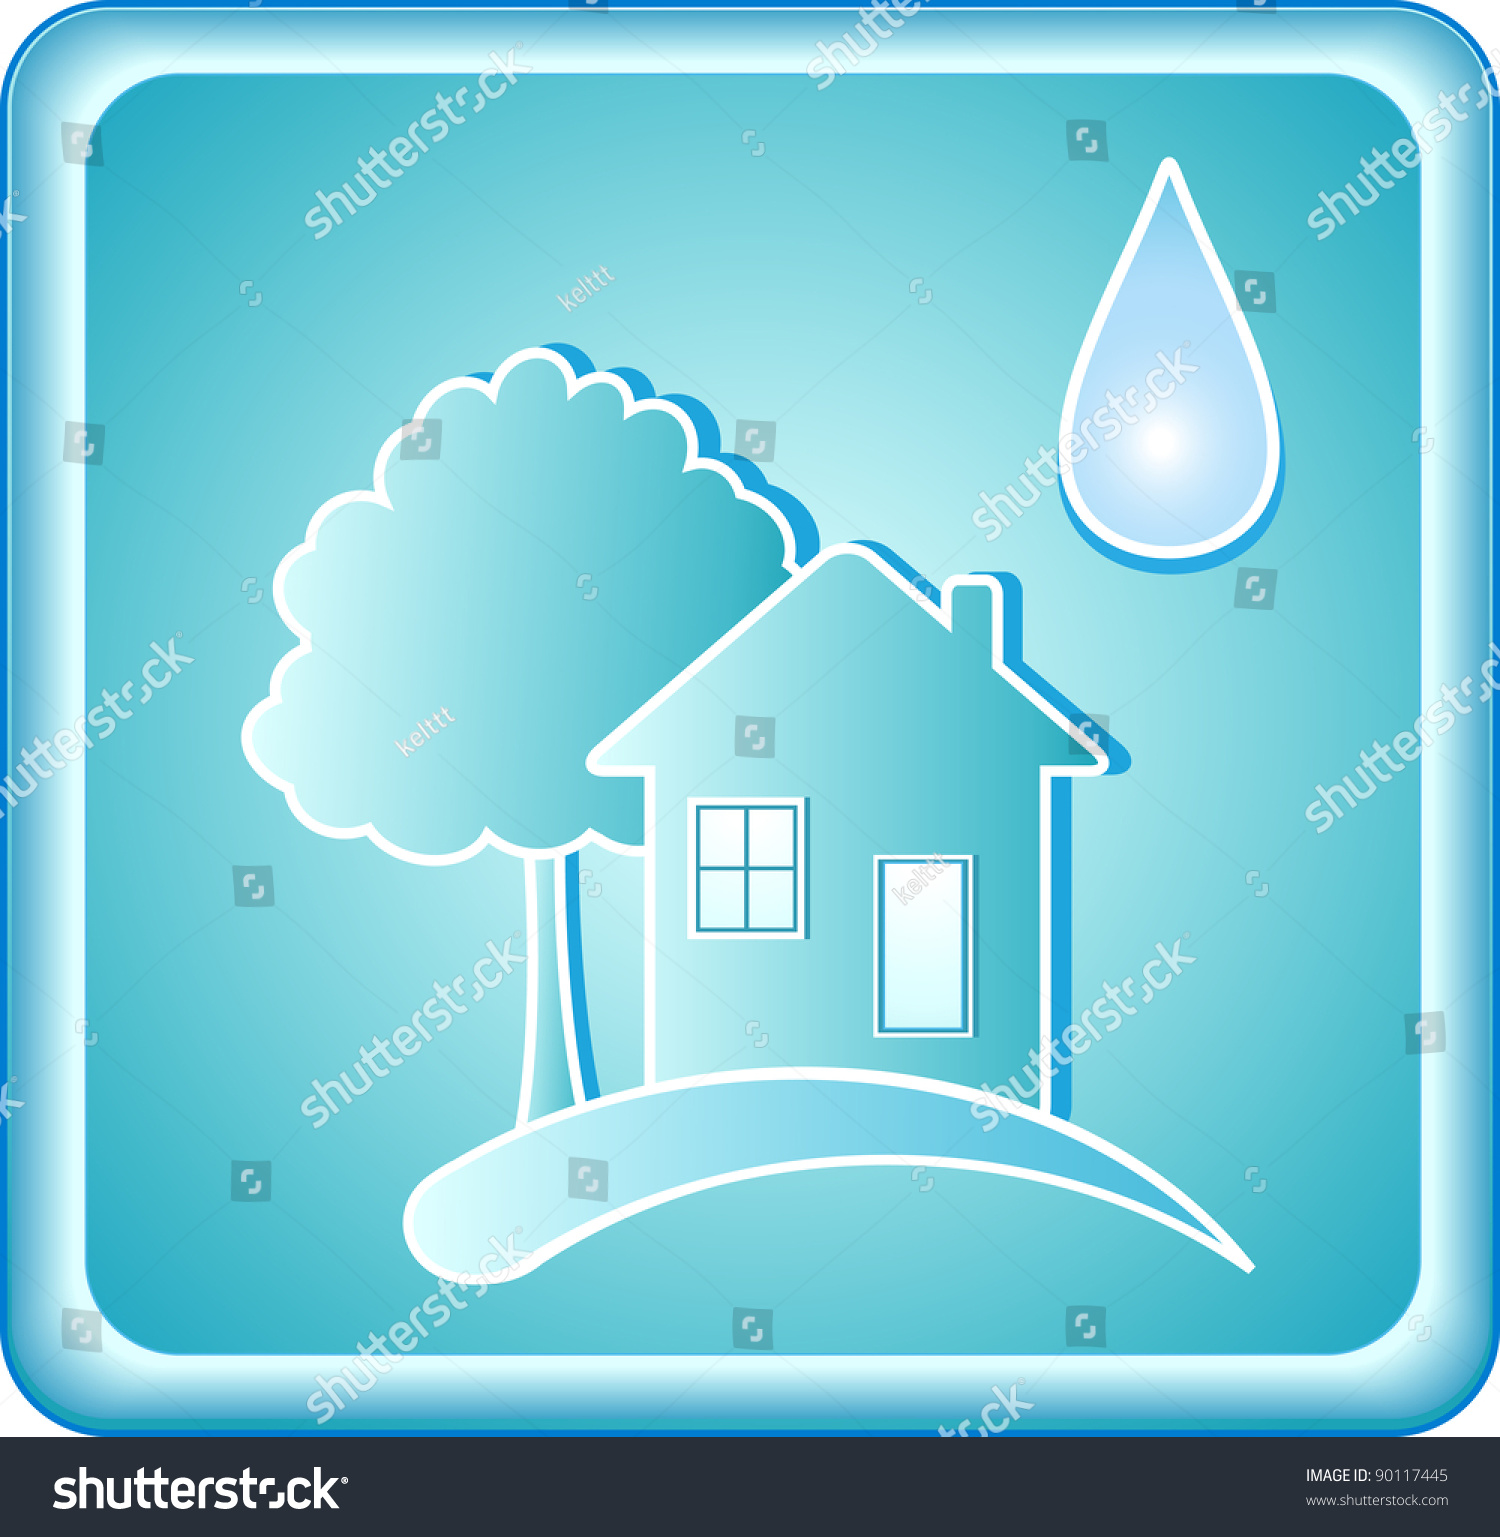 Pure Blue Water Sign With House Tree And Drop Stock Vector Illustration ...